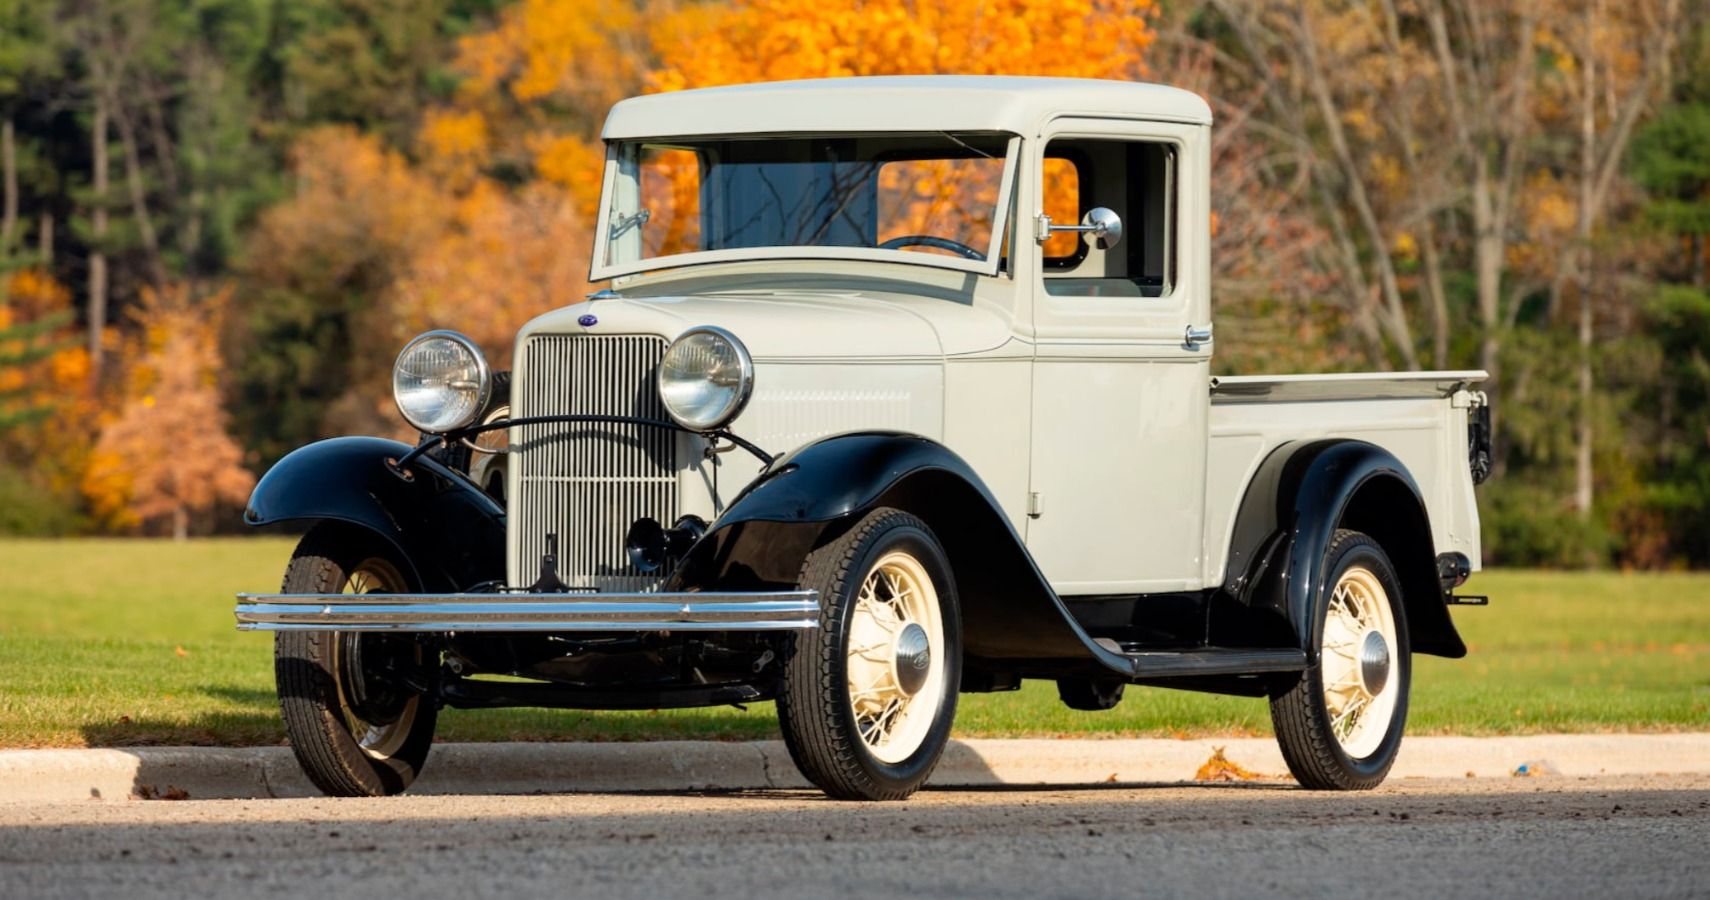 A closer look at the 1932 Ford Model B.